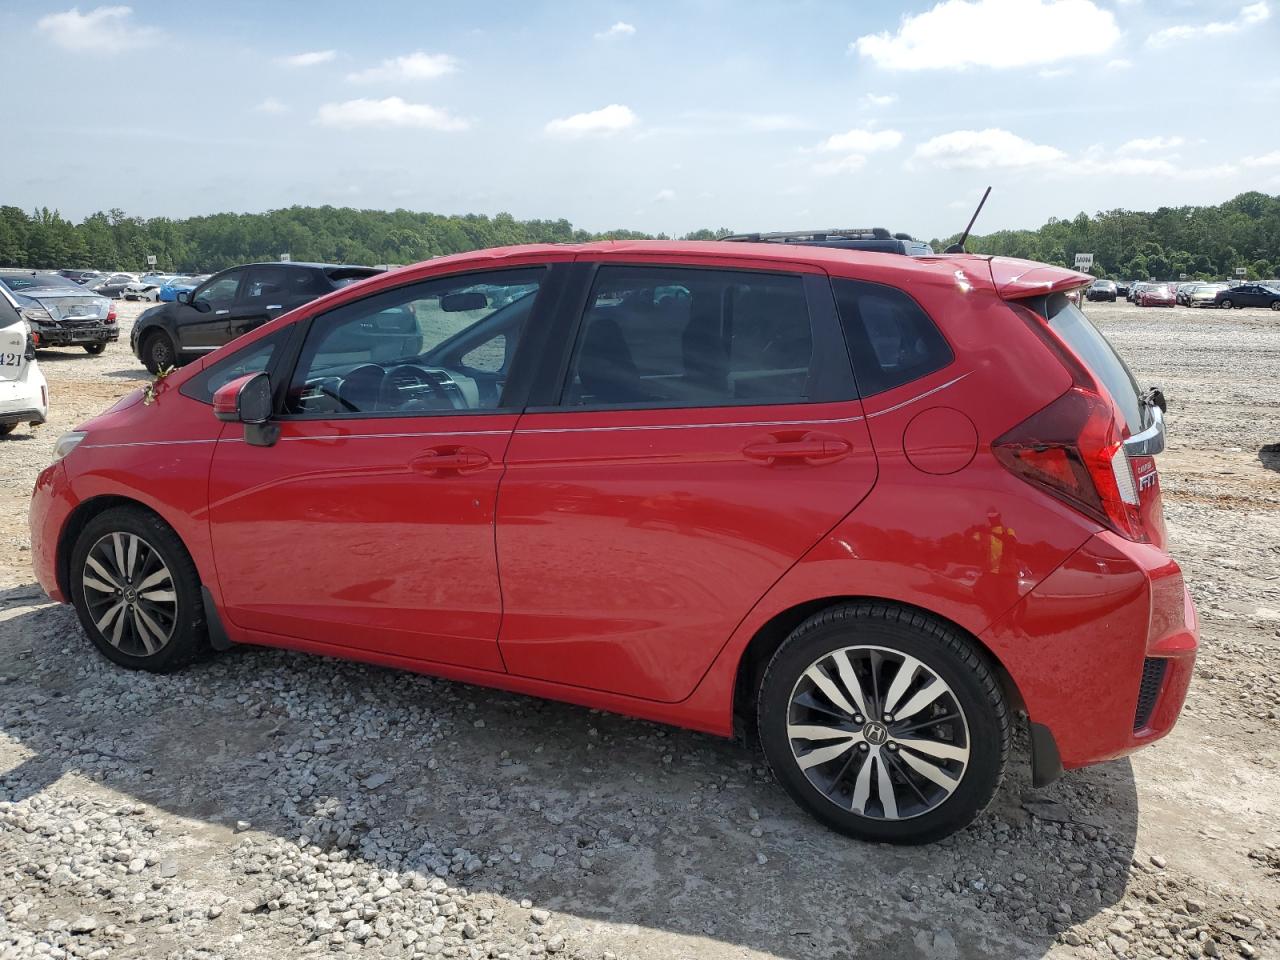 Buy 2016 Honda Fit Ex 1.5L JHMGK5H77GX****** from USA Auctions 